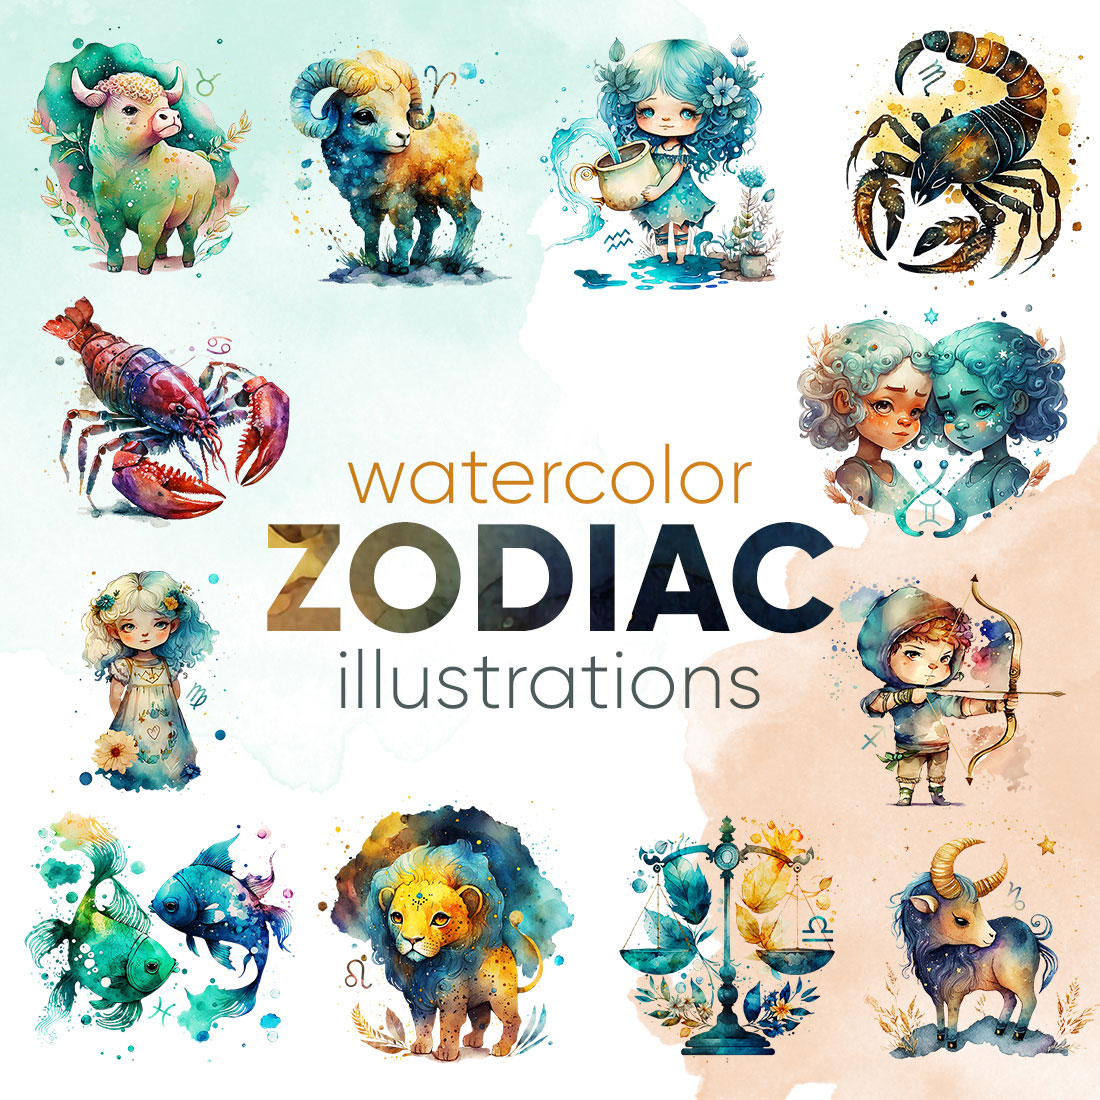 Watercolor Zodiac Sign Illustrations cover image.